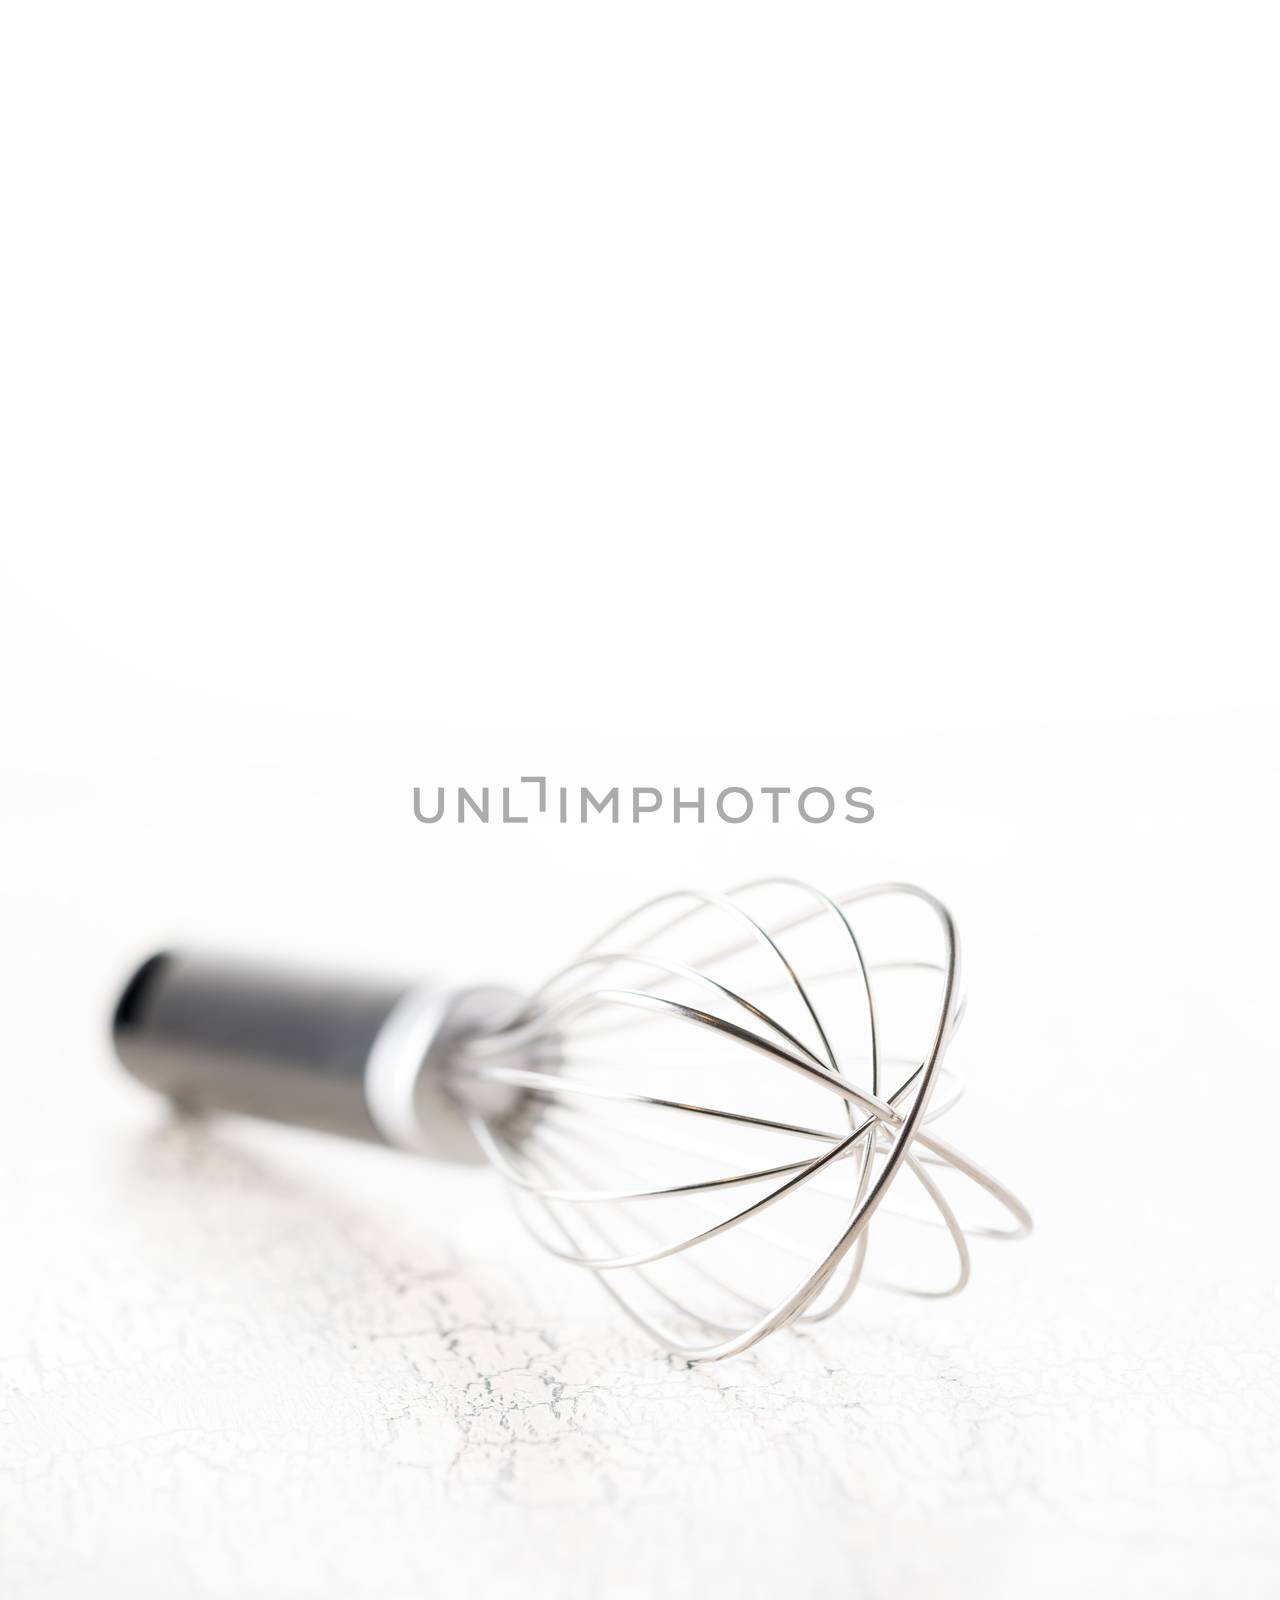 Artistic photograph of a simple kitchen wisk with an intentional shallow depth of field.